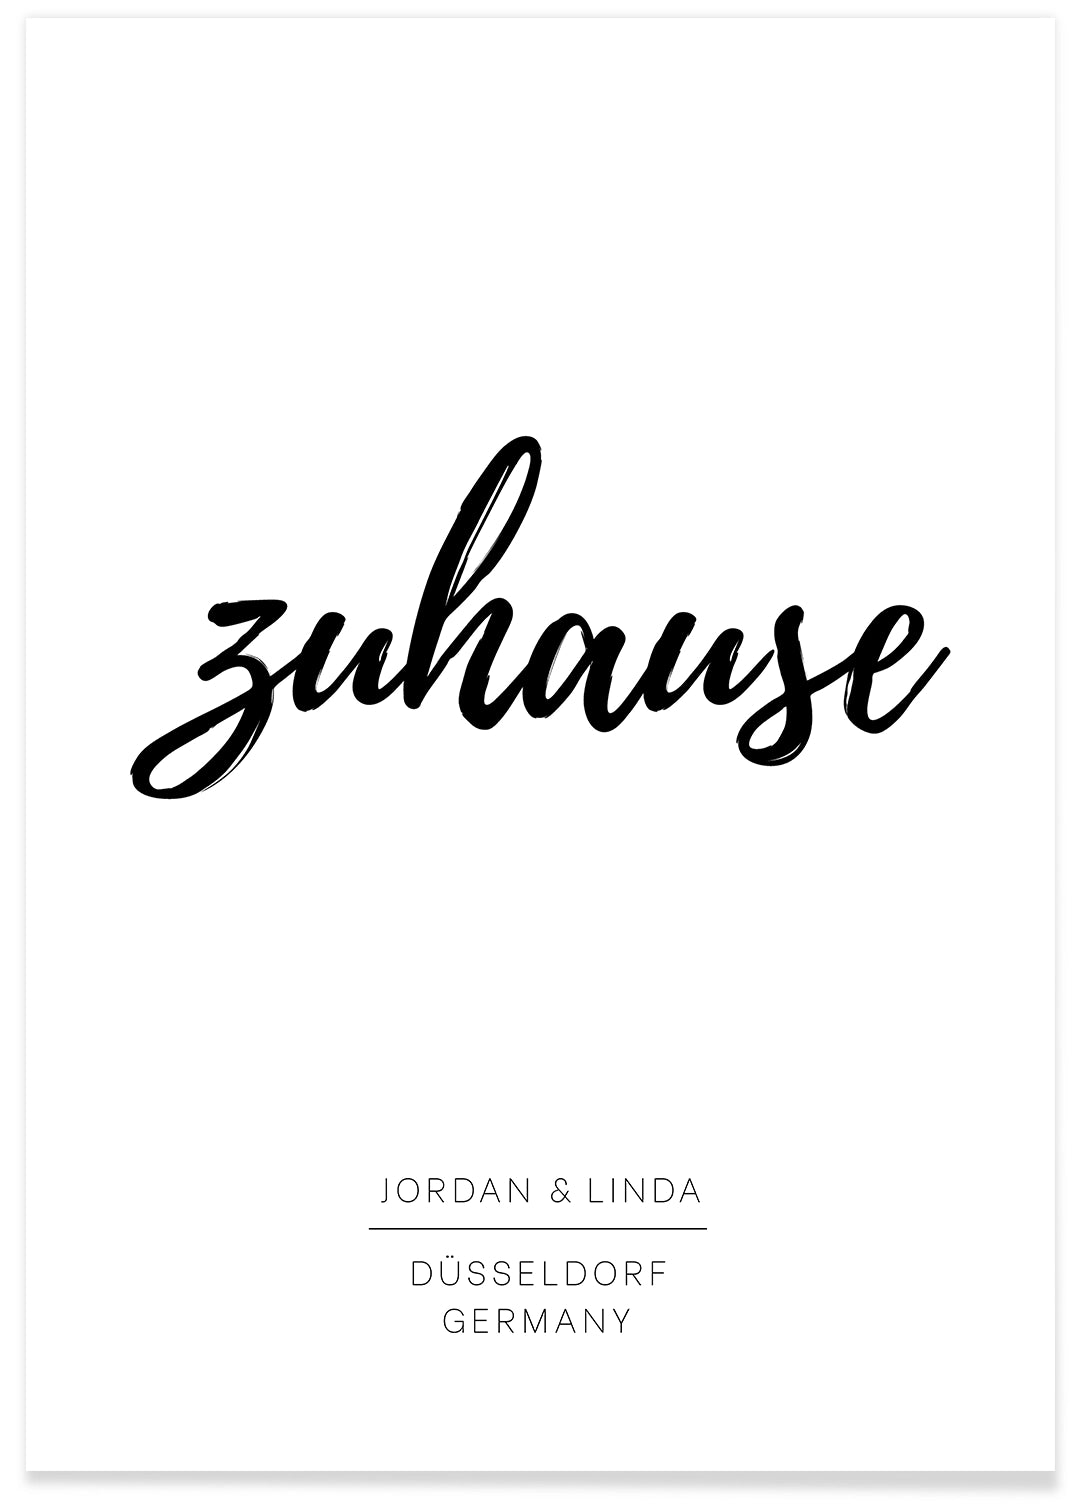 Poster "Zuhause Pinsel"